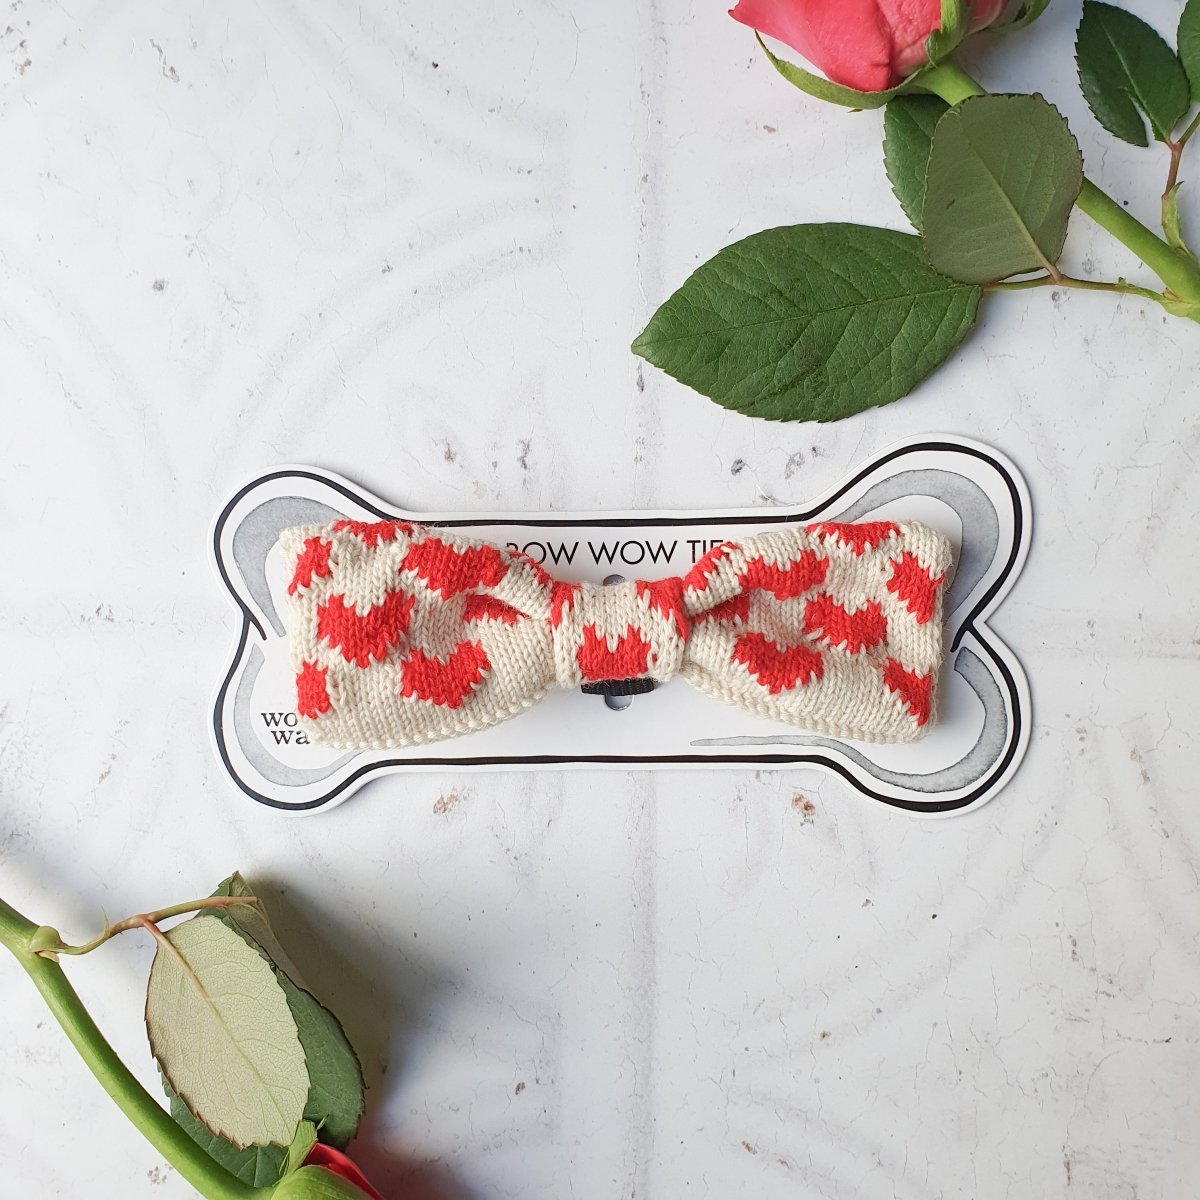 The Love Bow Tie (Cream + Red): Large Dog - Wool & Water